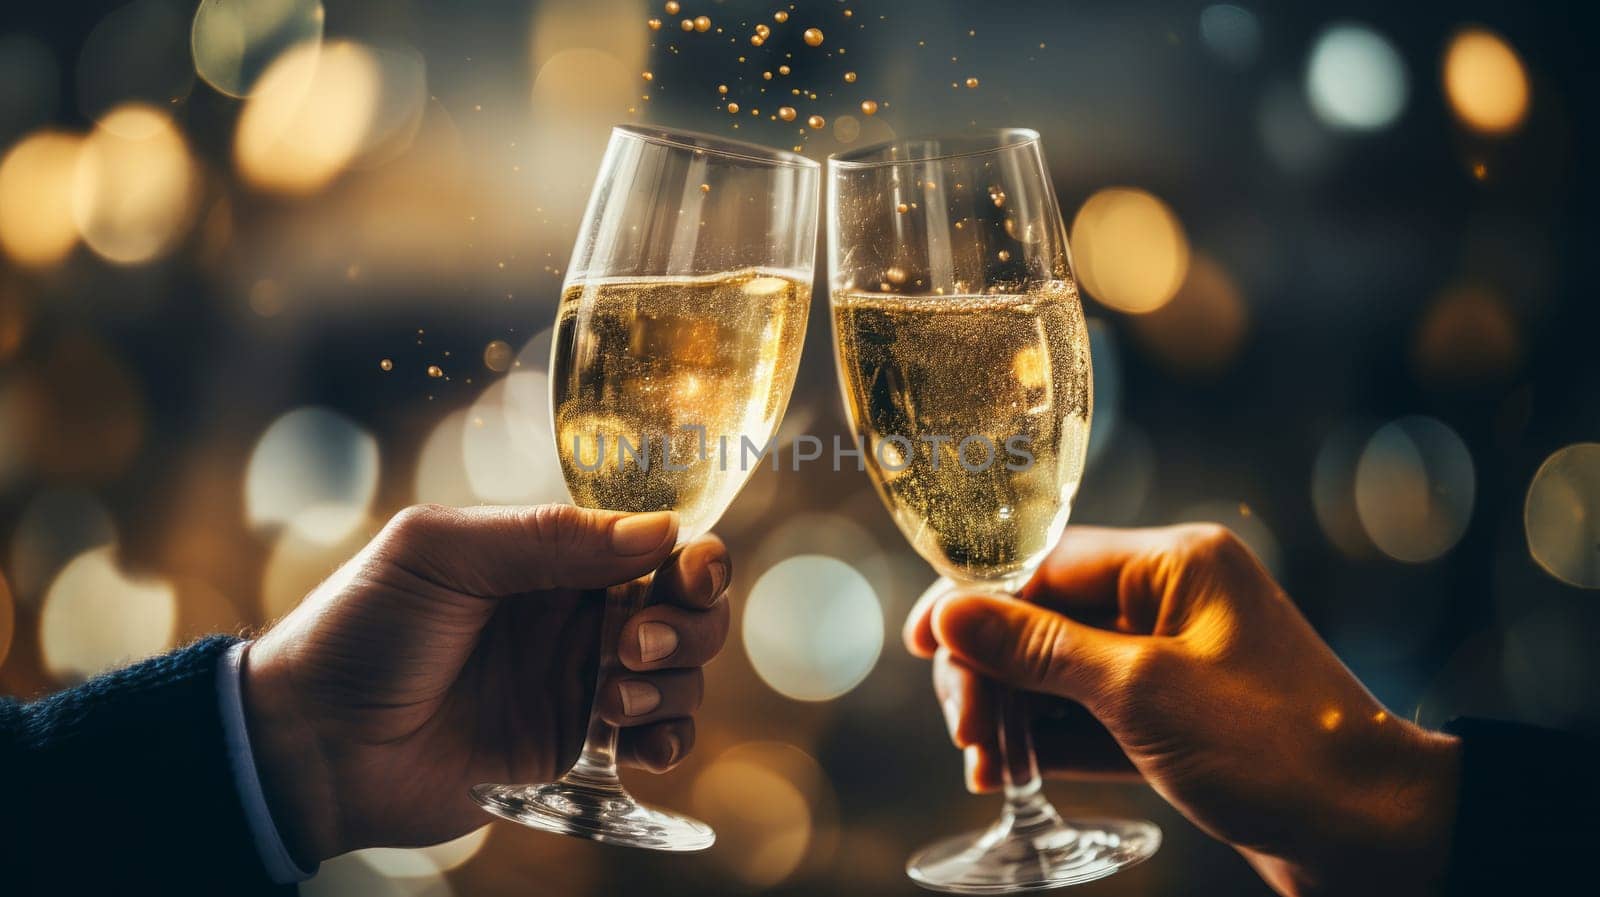 Celebrate with champagne Capture the festive mood of a party with this elegant photo of two hands clinking champagne glasses against a sparkling bokeh background. by DogDrawHand